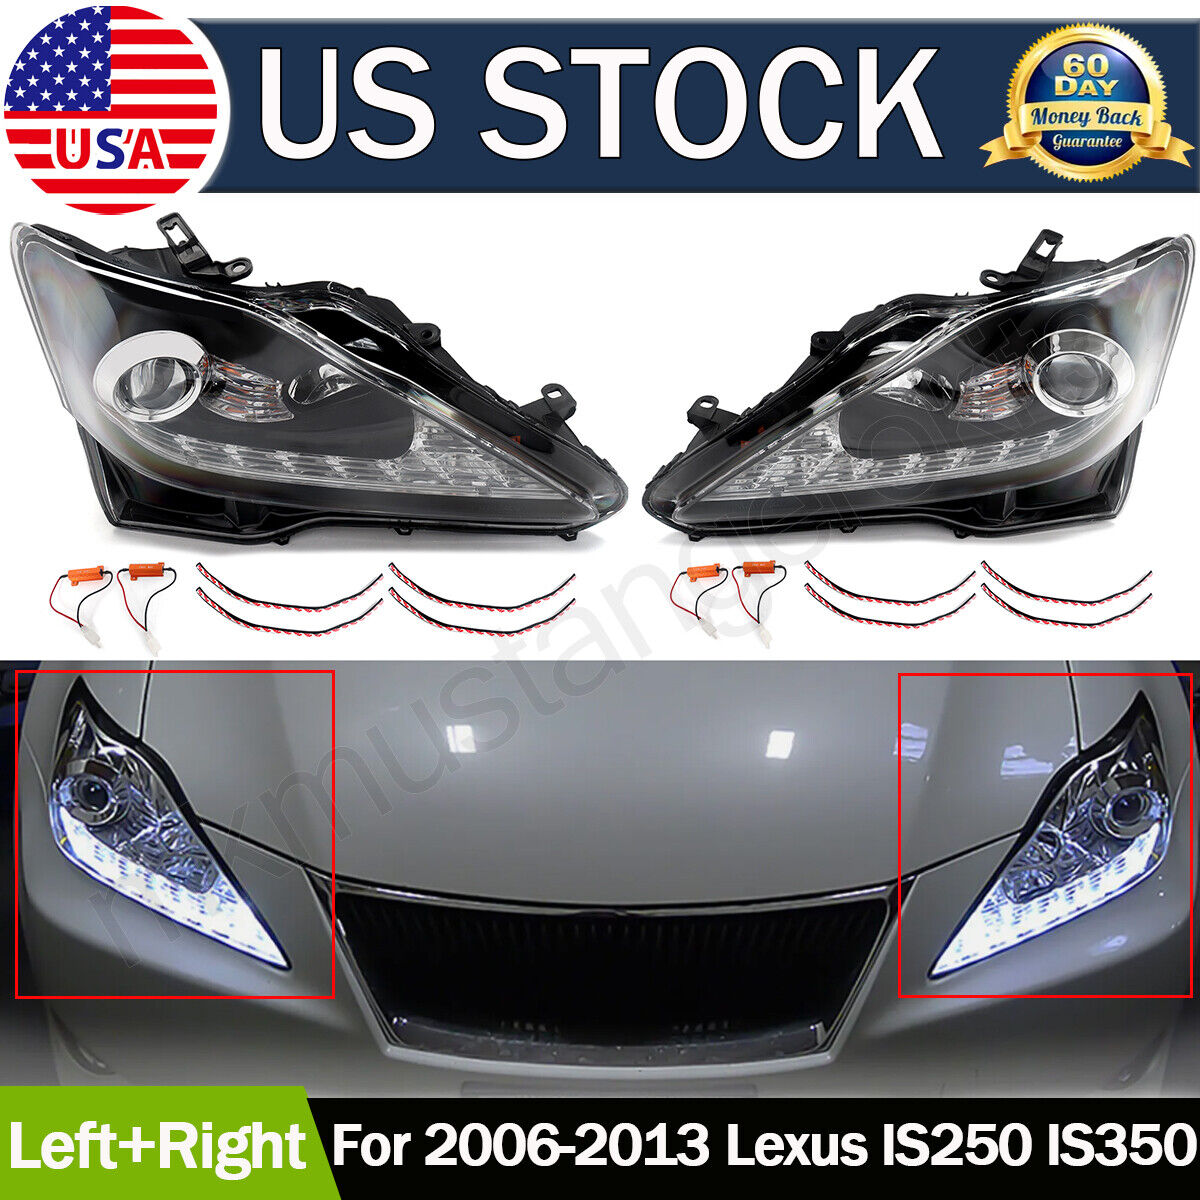 2x For 2006-2013 Lexus IS250 IS350 Left+Right LED DRL Projector Headlights Black